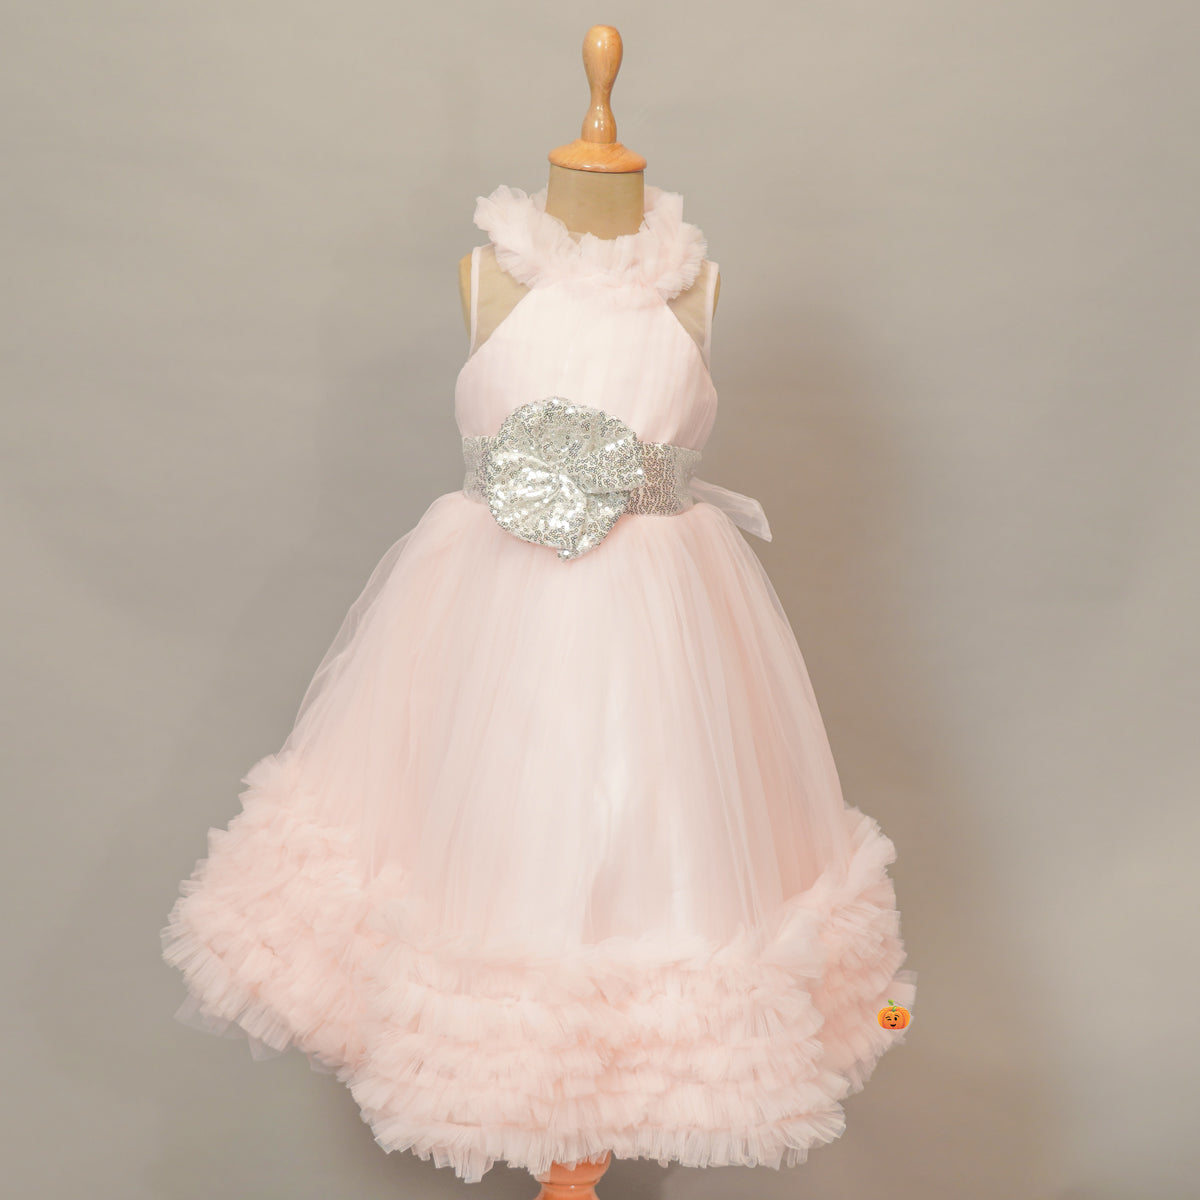 Toddler Baby Girl Princess Dress Ball Gowns Birthday Party Sequins Dress  Costume | eBay